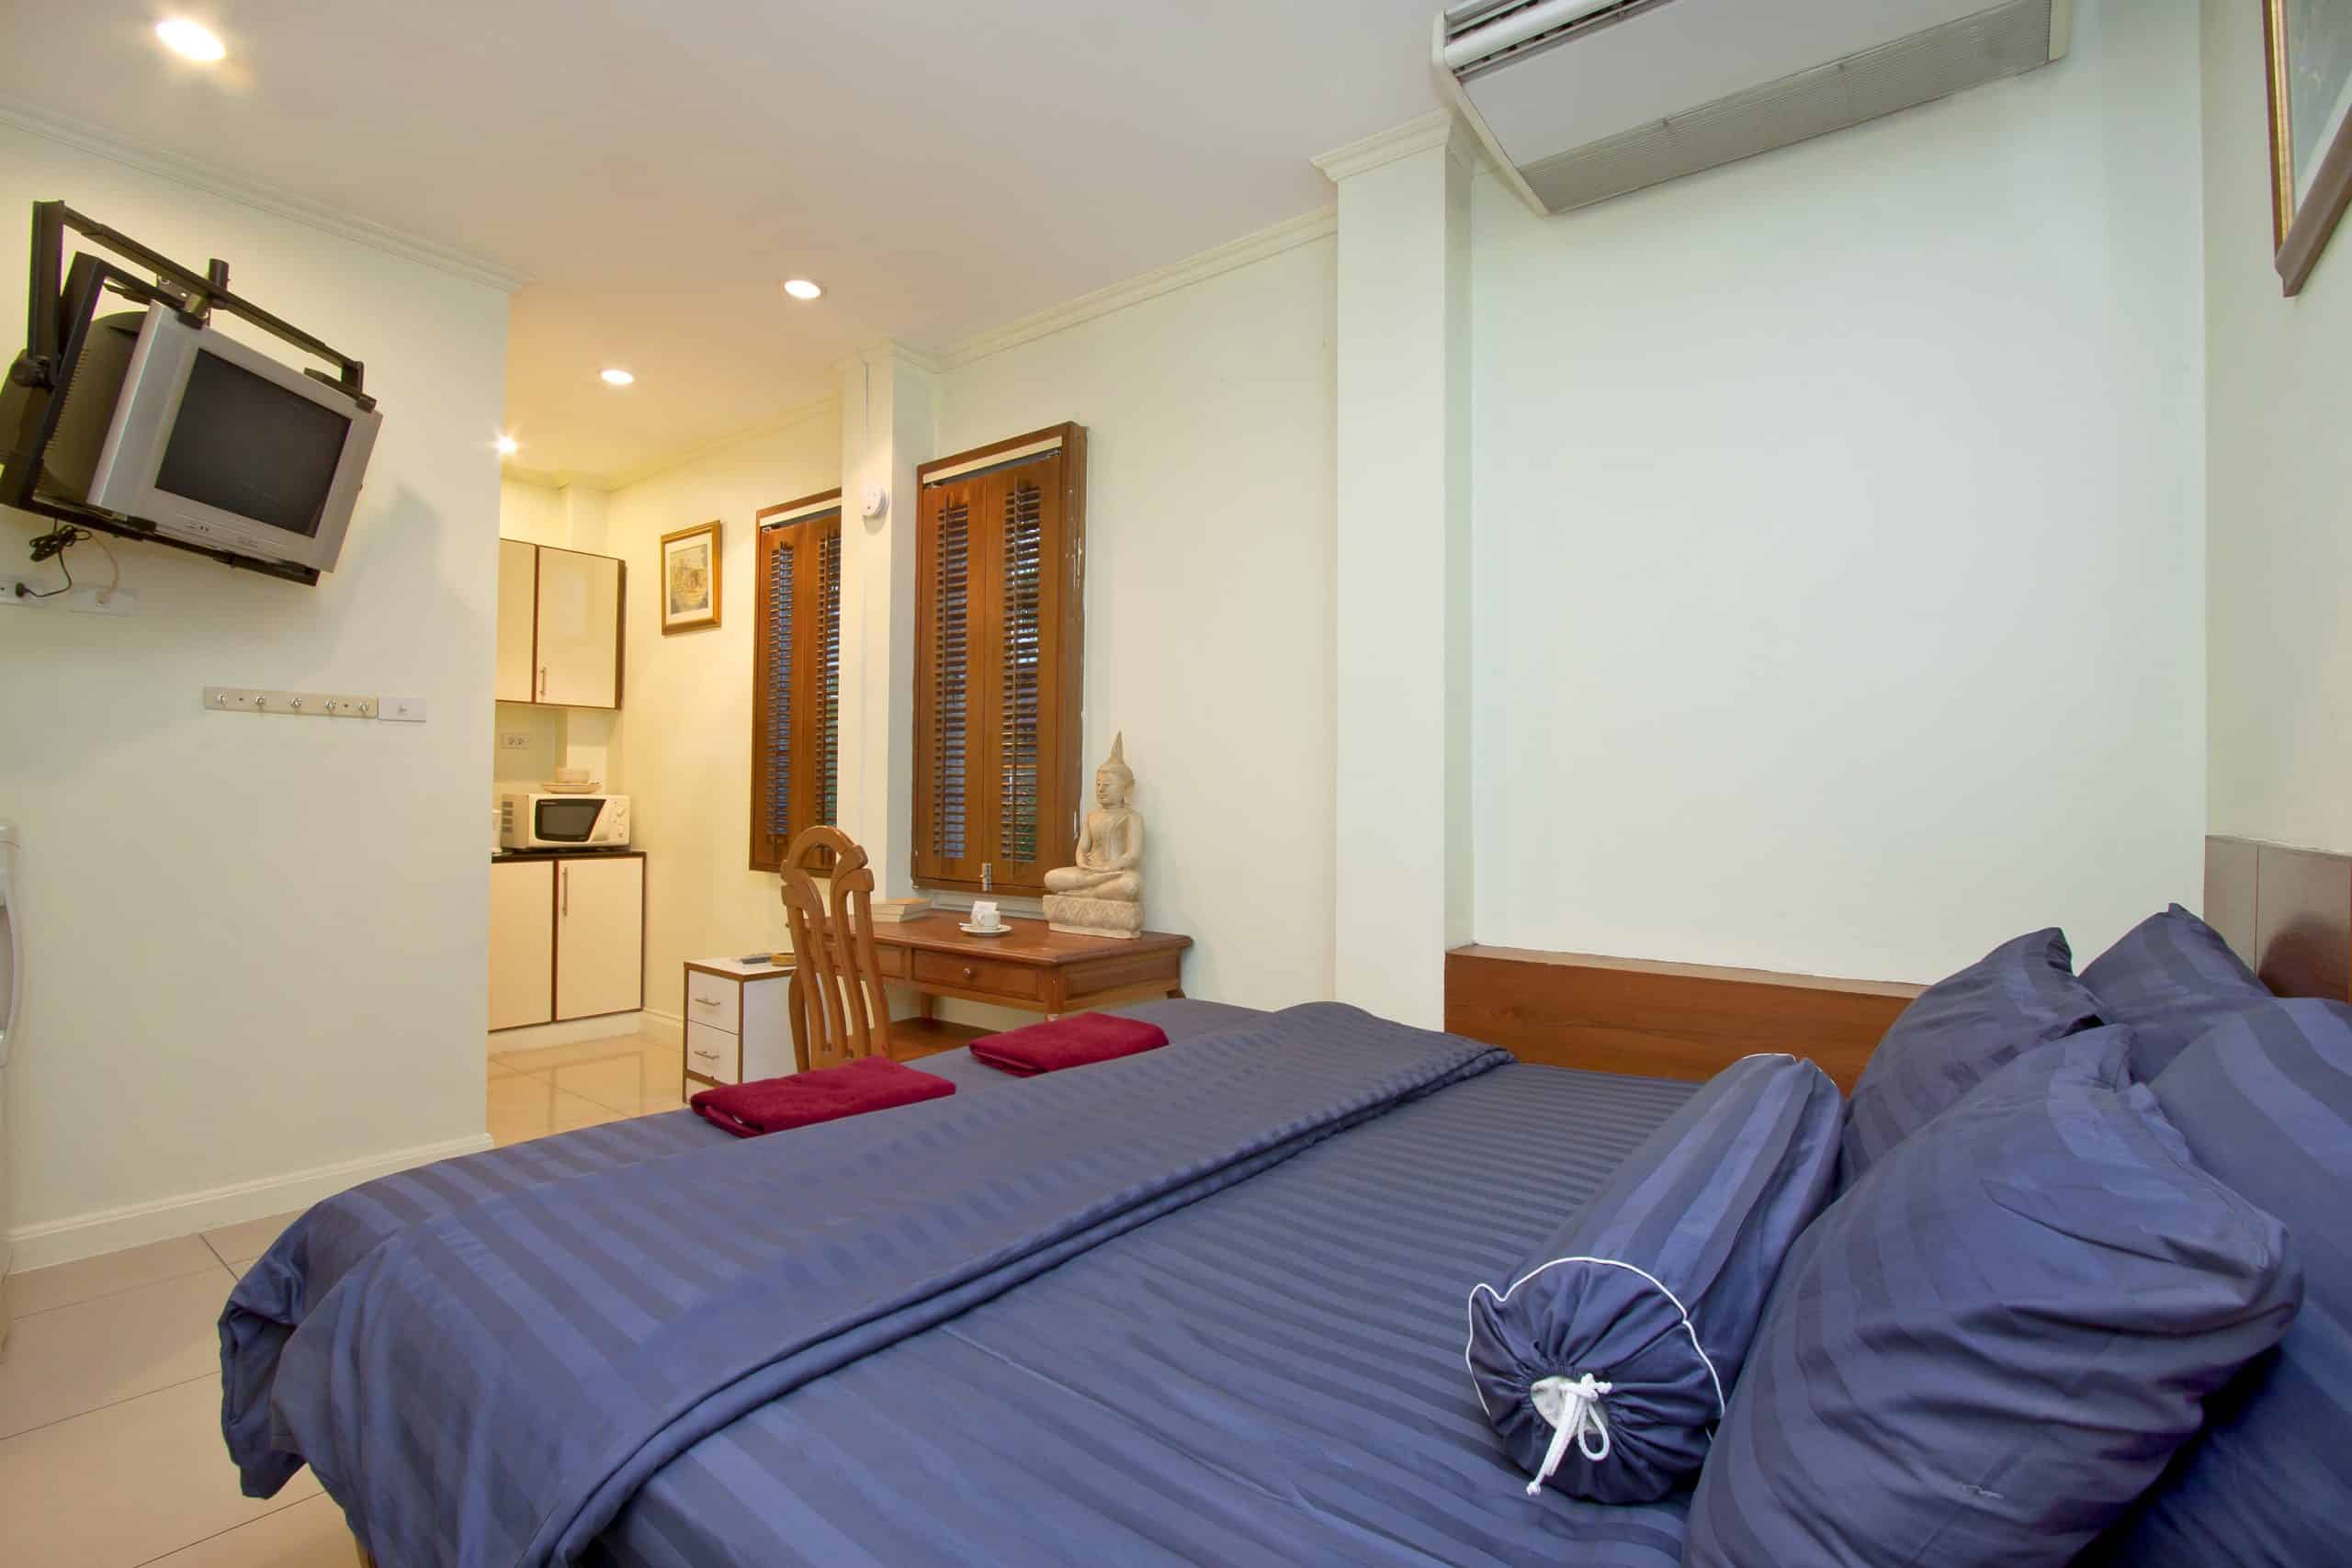 Savor a comfortable and cozy stay in our charming small studio apartment in Pattaya, featuring a stylish unit with a bed, kitchenette, private shower, air conditioning, and Wi-Fi for your comfort